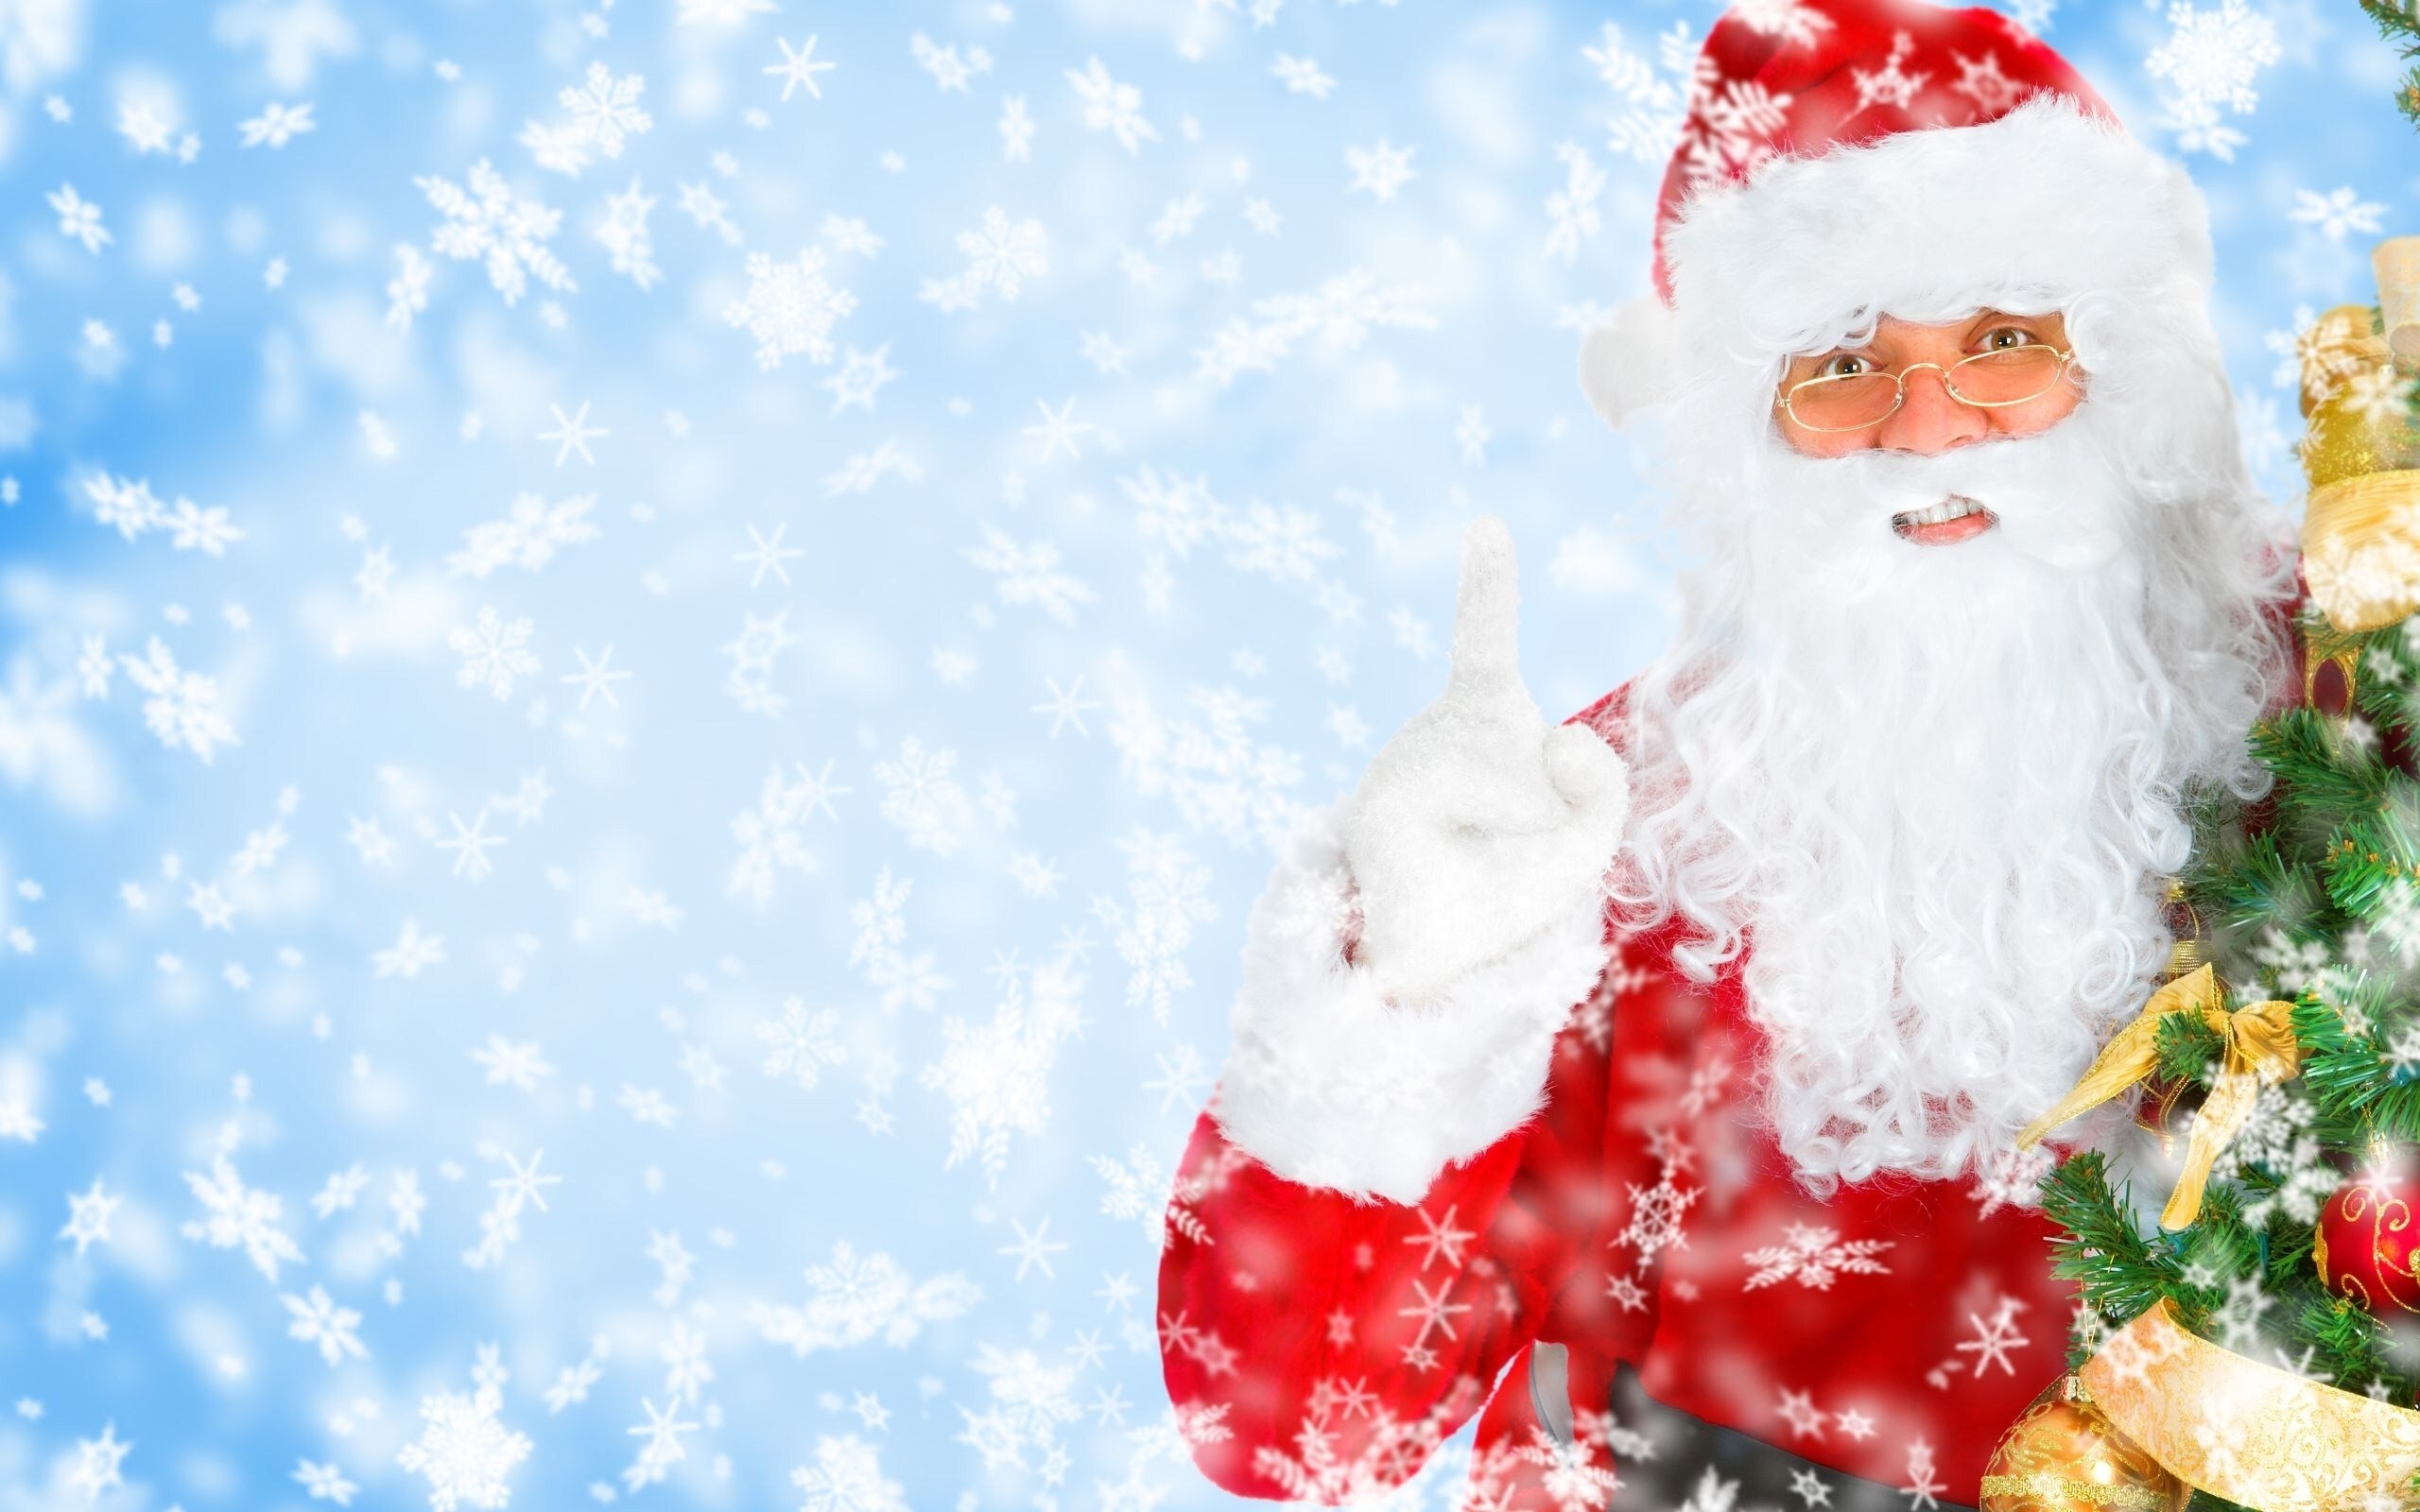 Real glasses santa claus hd desktop walpapers background ,with, snowflakes